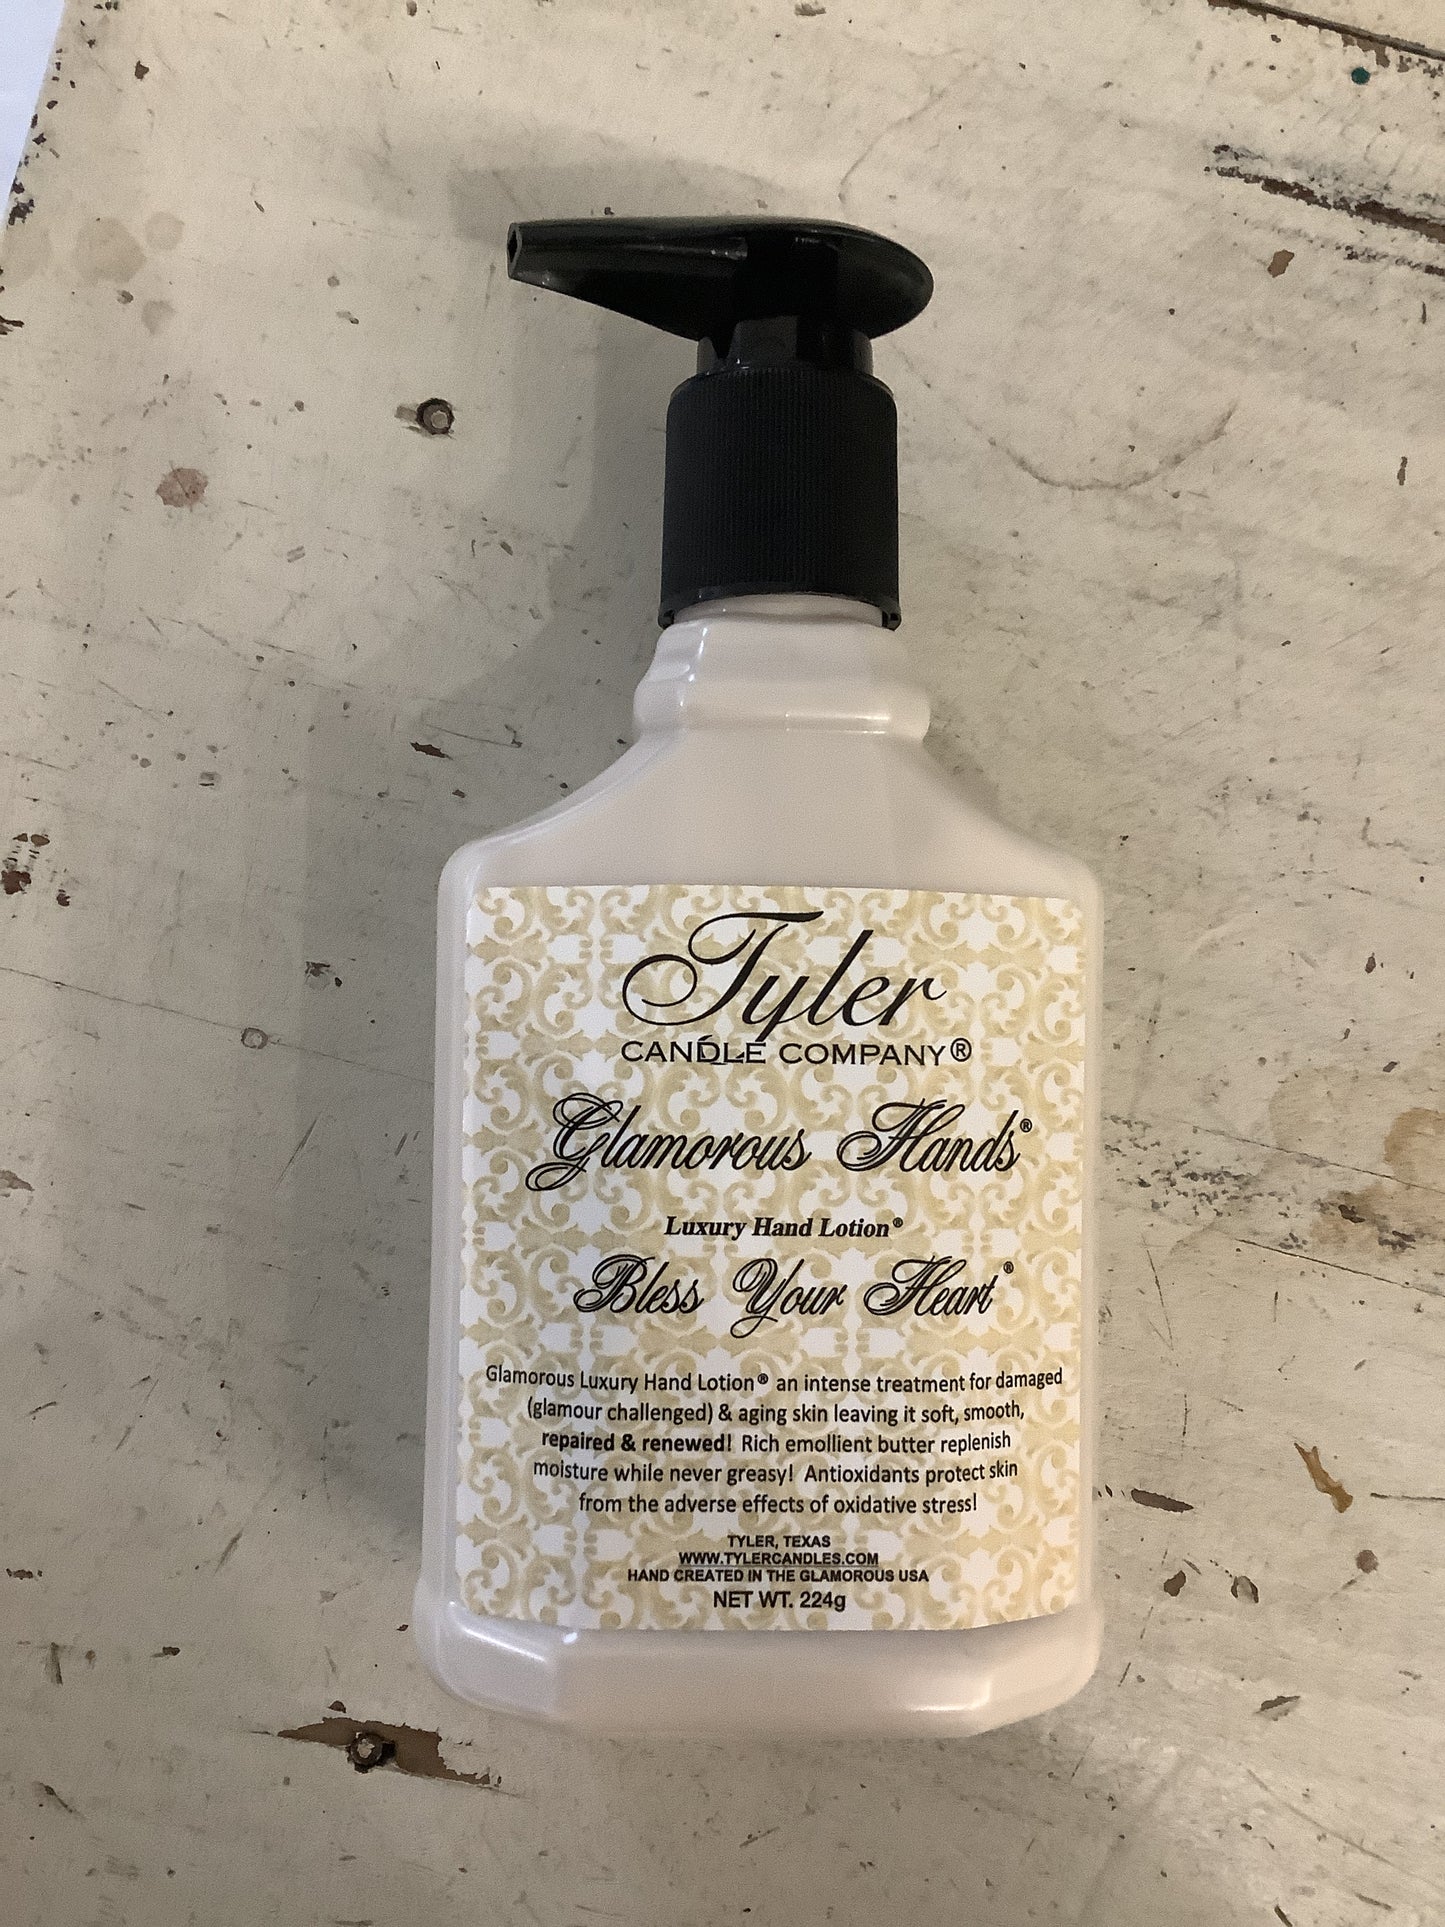 Glamorous Luxury Hand Lotion Bless Your Heart